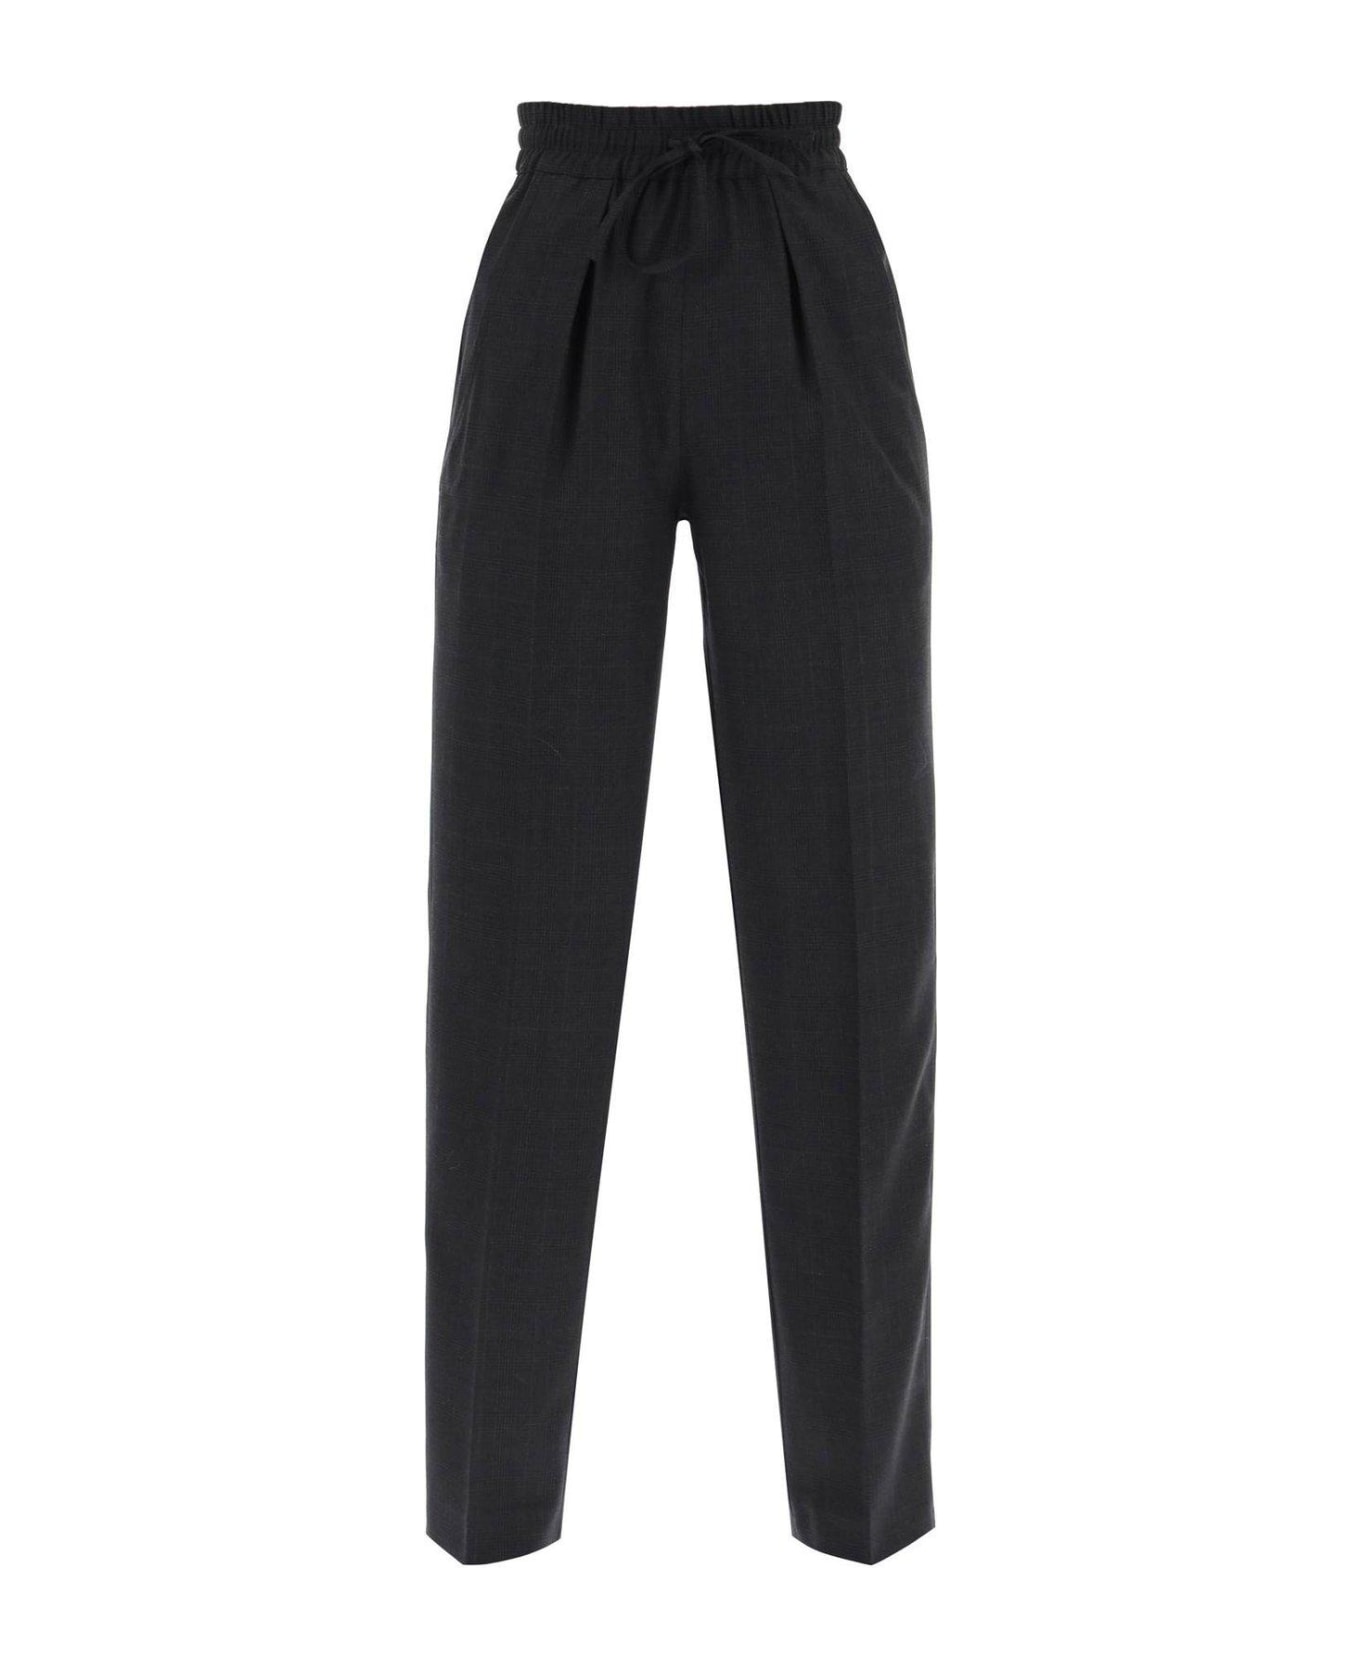 Isabel Marant Liska Checked High-rise Trousers - Antracite